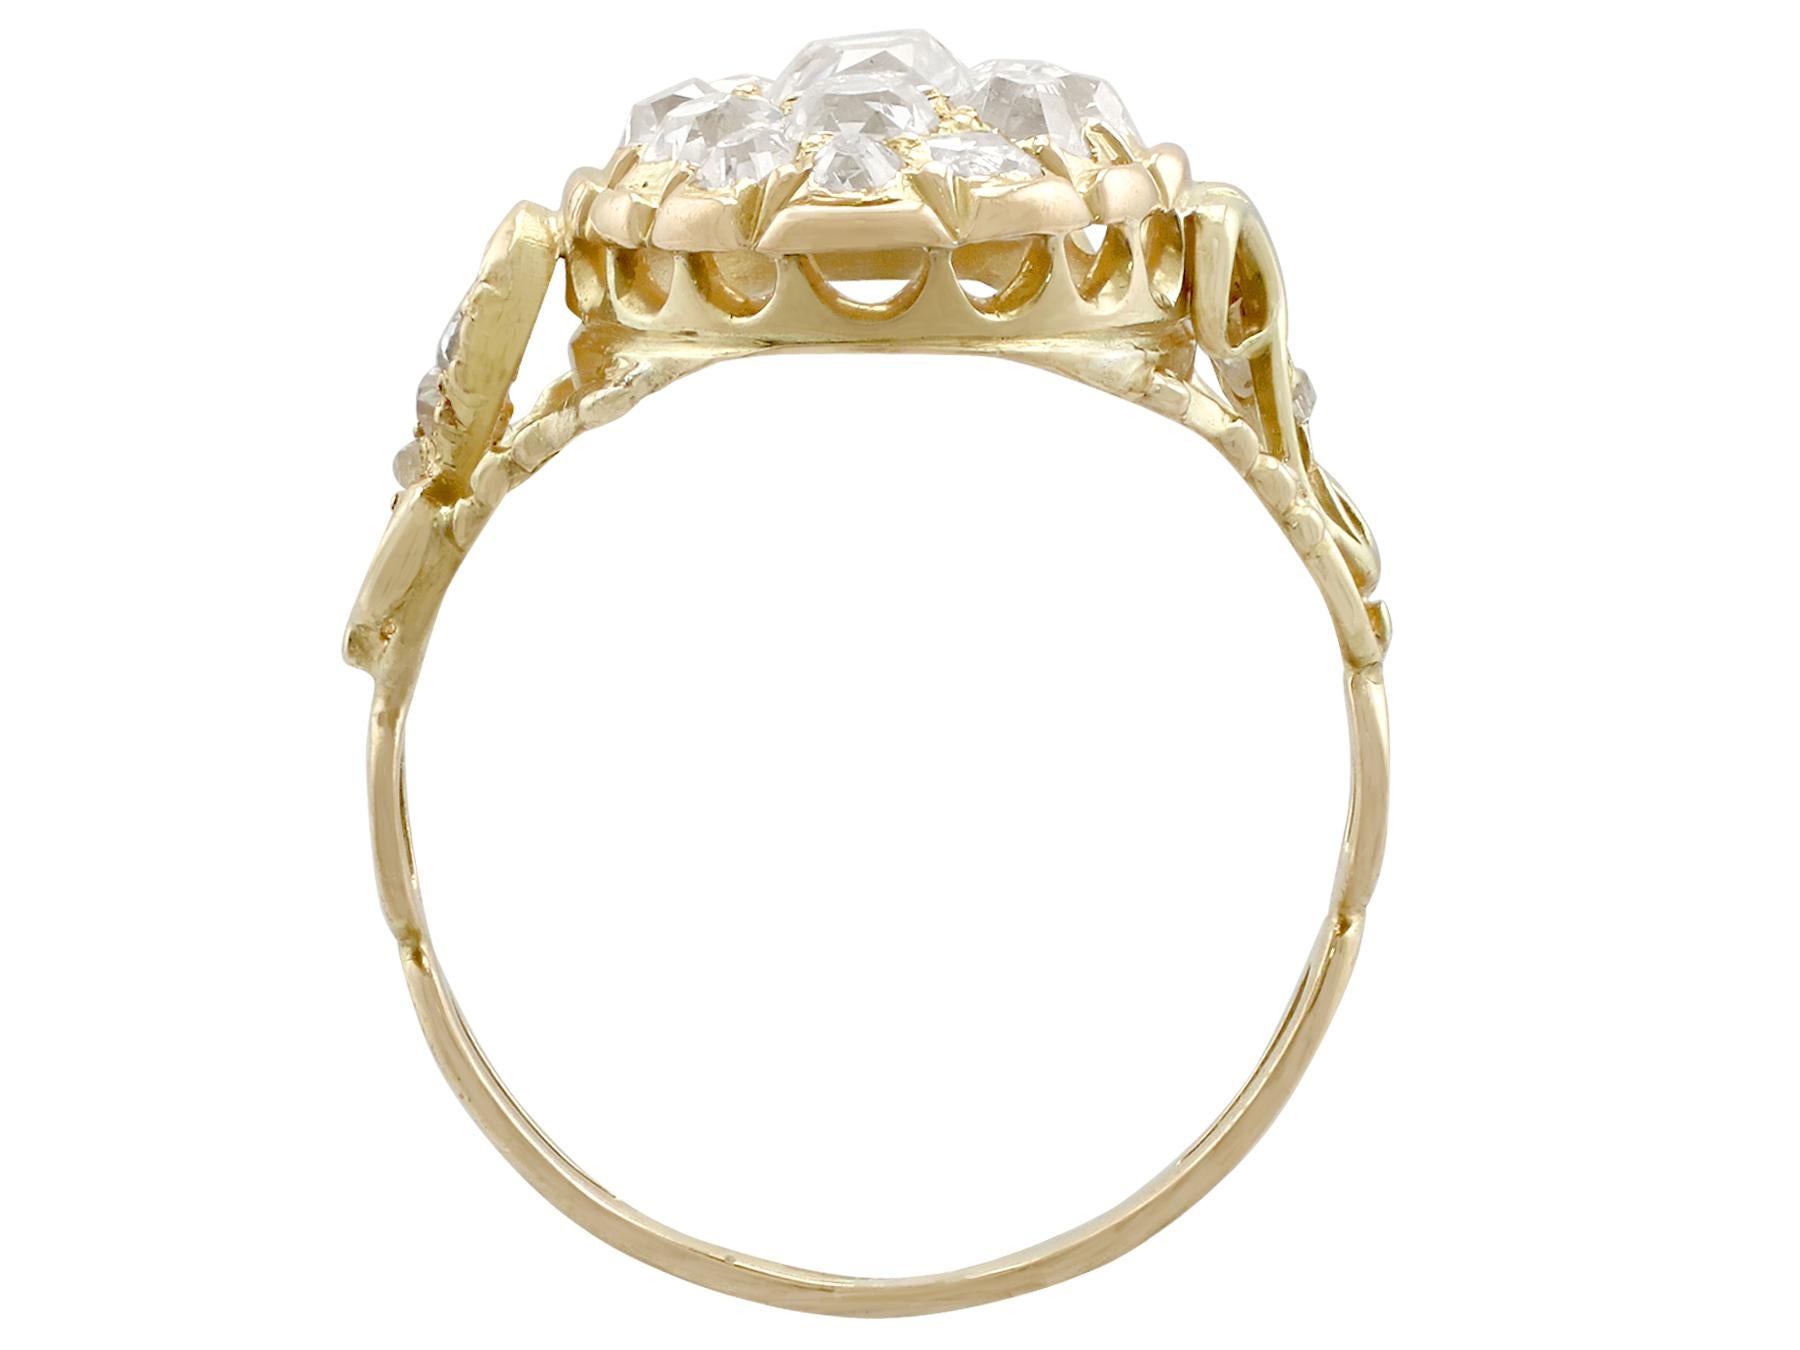 1870s Antique Victorian 1.51 Carat Diamond and Yellow Gold Cocktail Ring 1